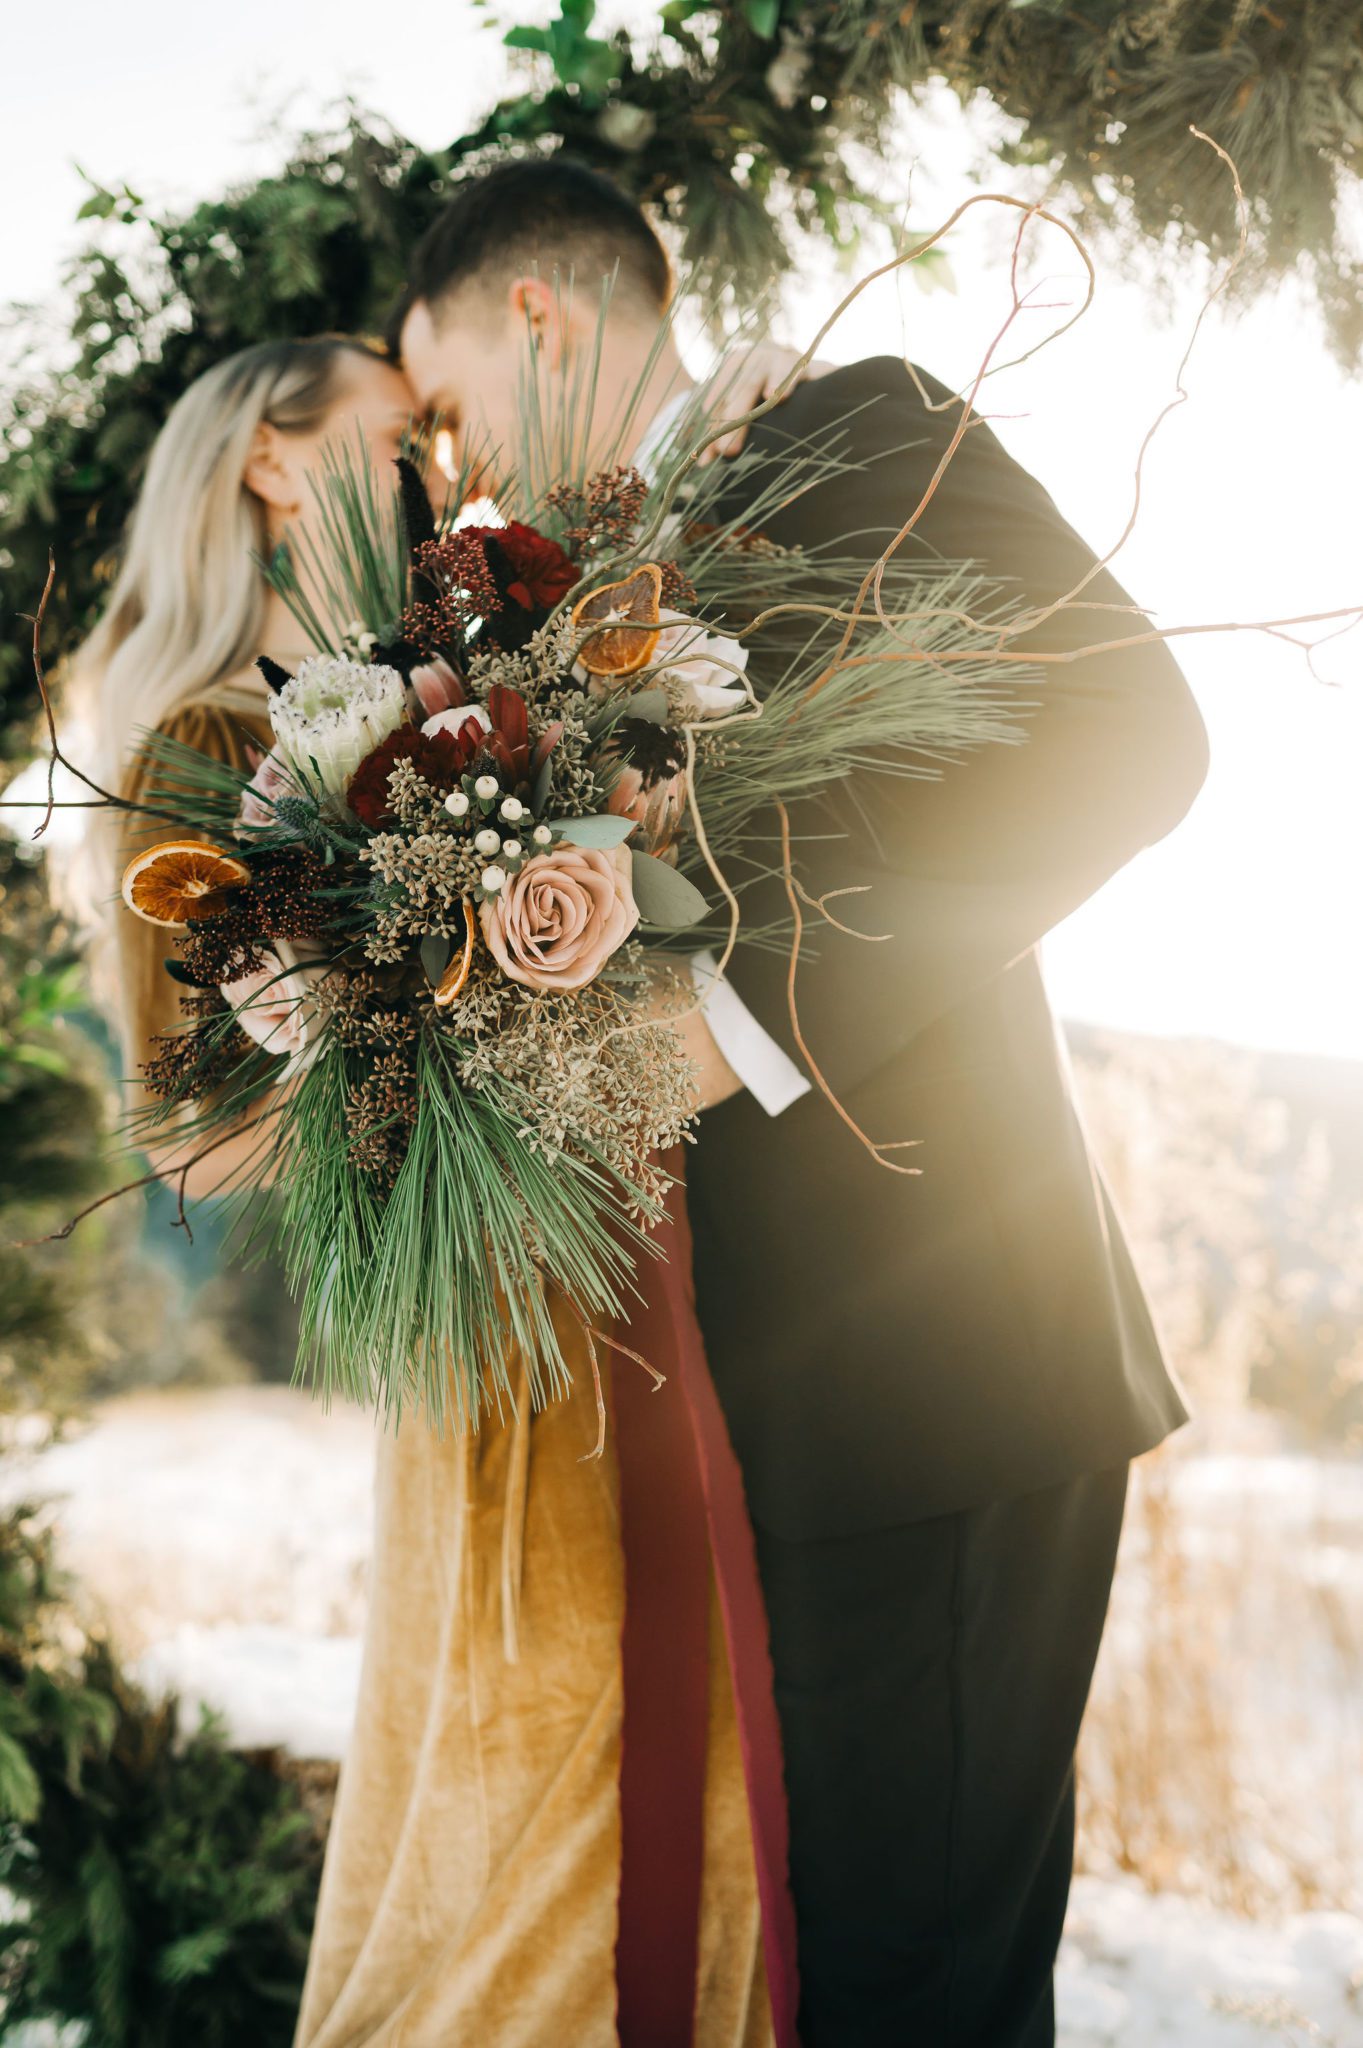 Winter wedding bouquet inspiration with roses and candied oranges, unique bouquet inspiration